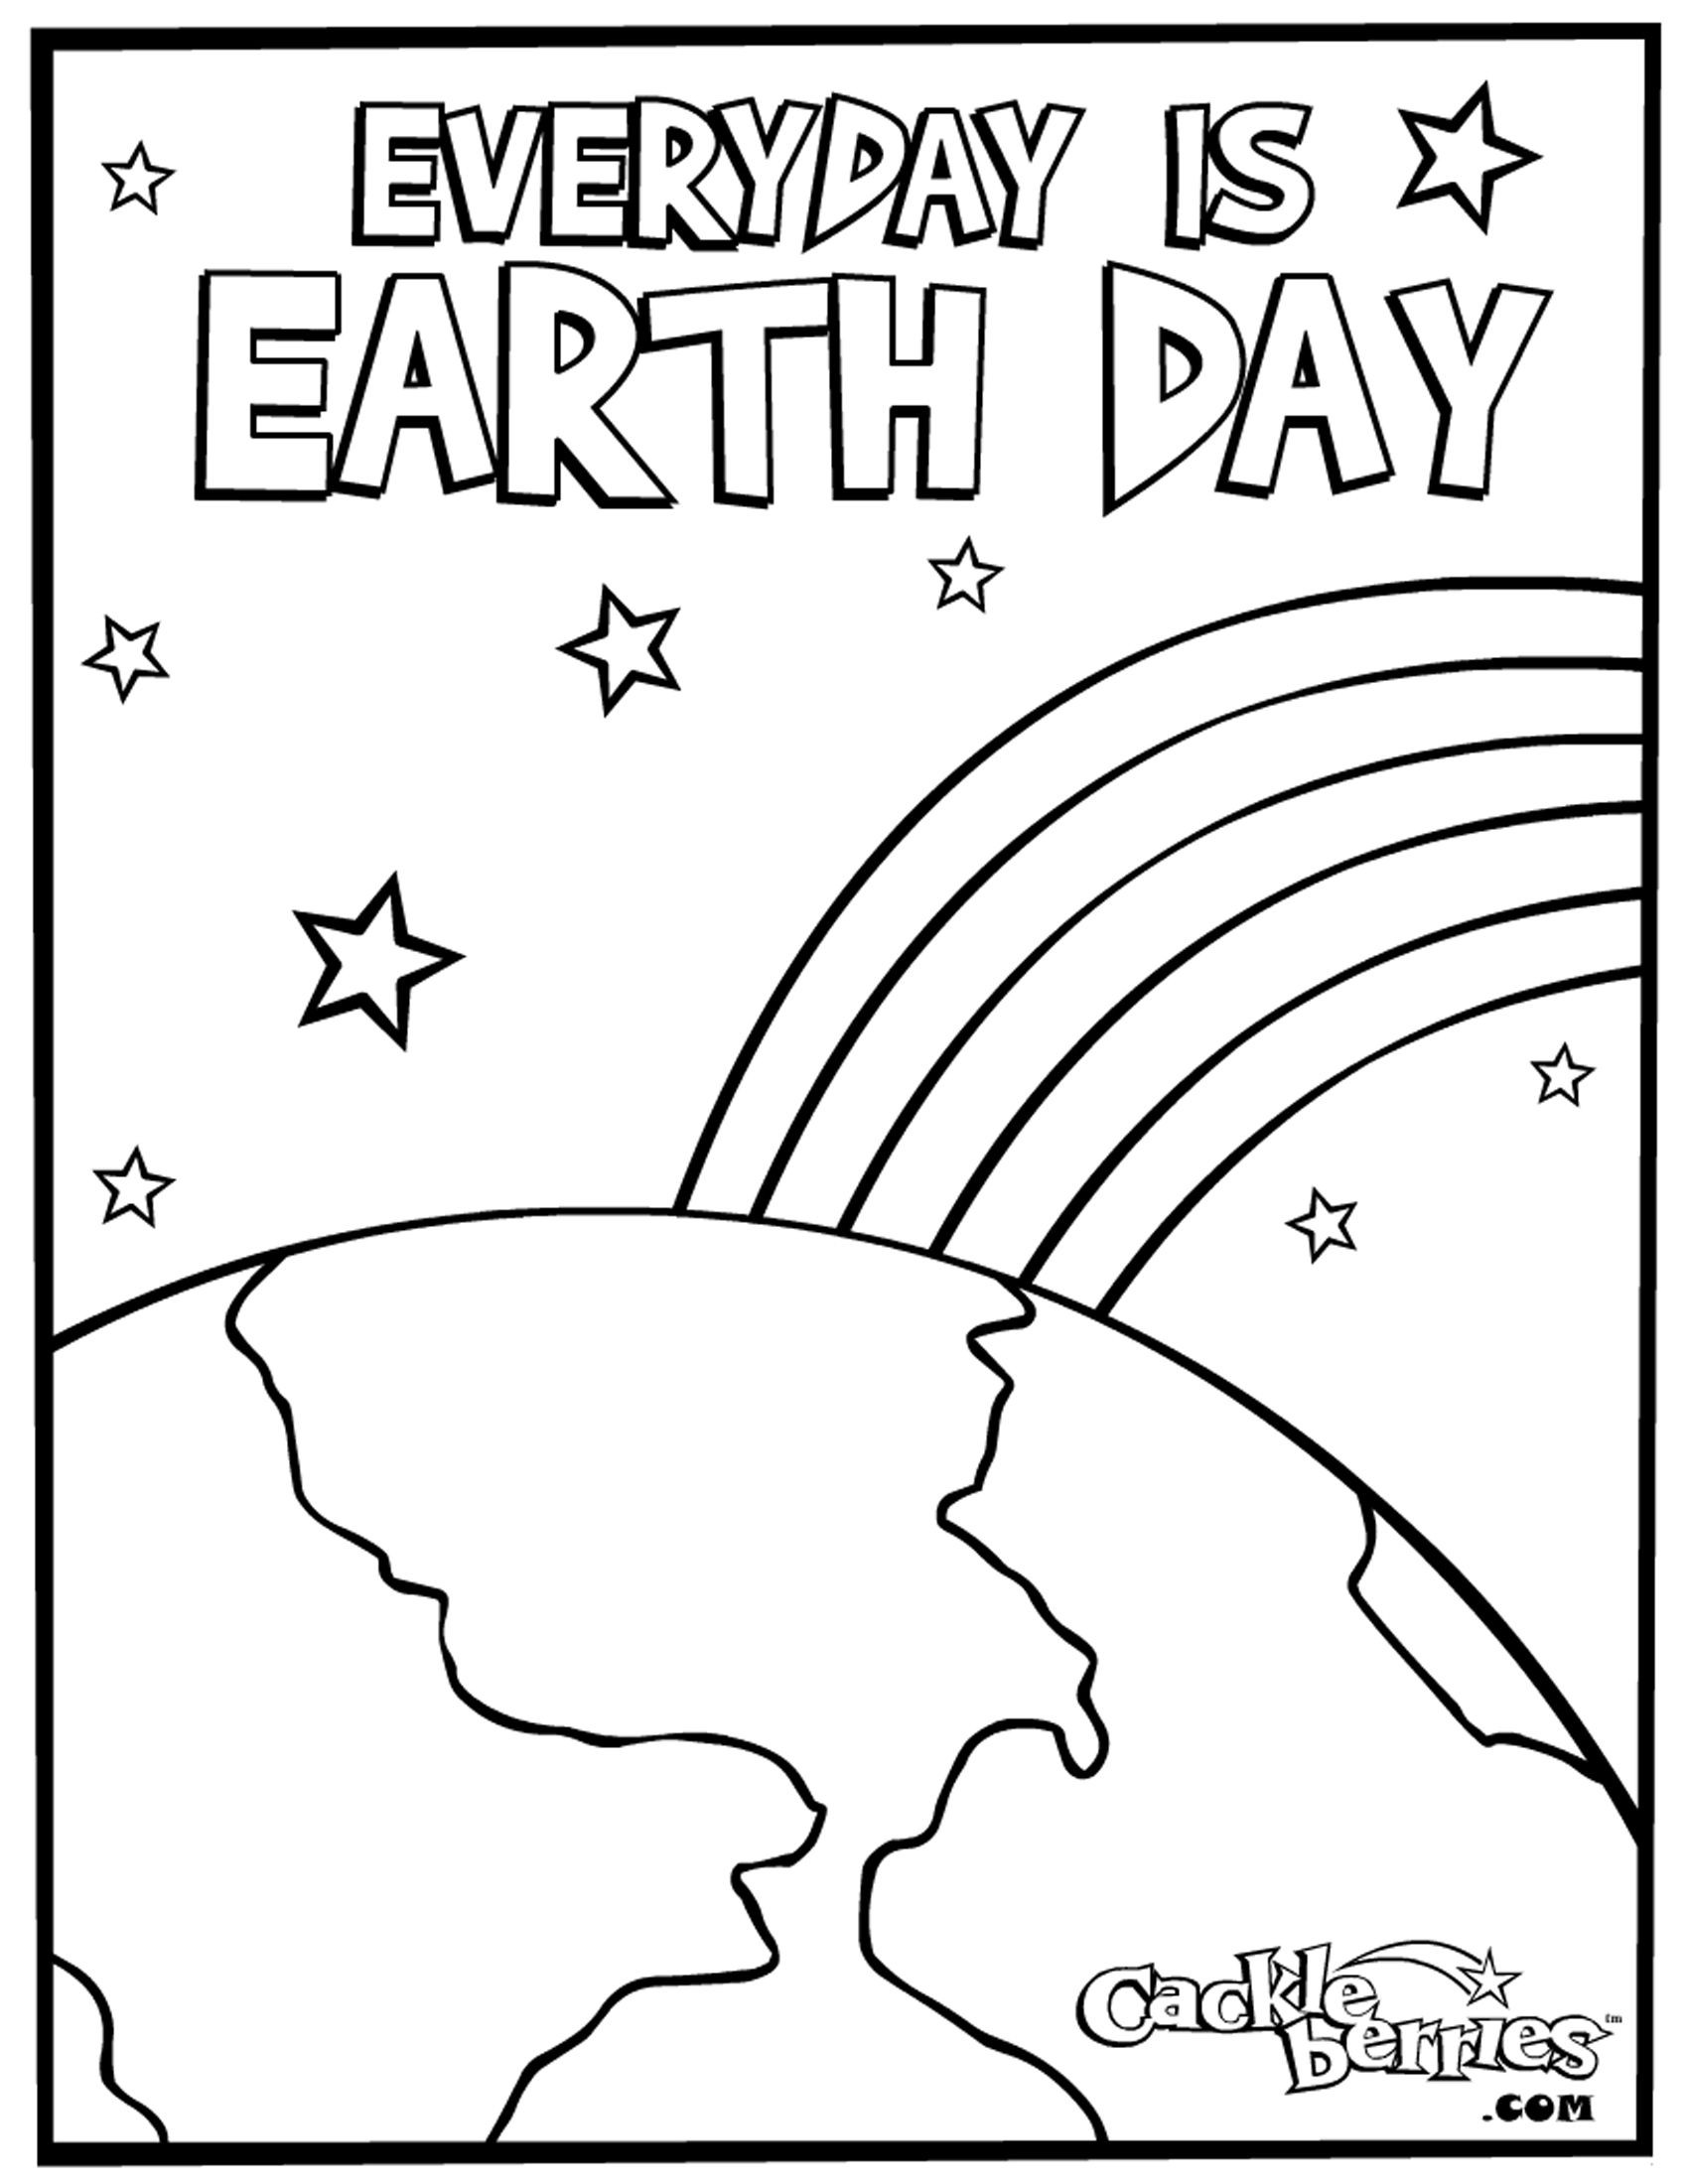 Earth Day Printable Coloring Pages
 earth day coloring sheets Pesquisa do Google